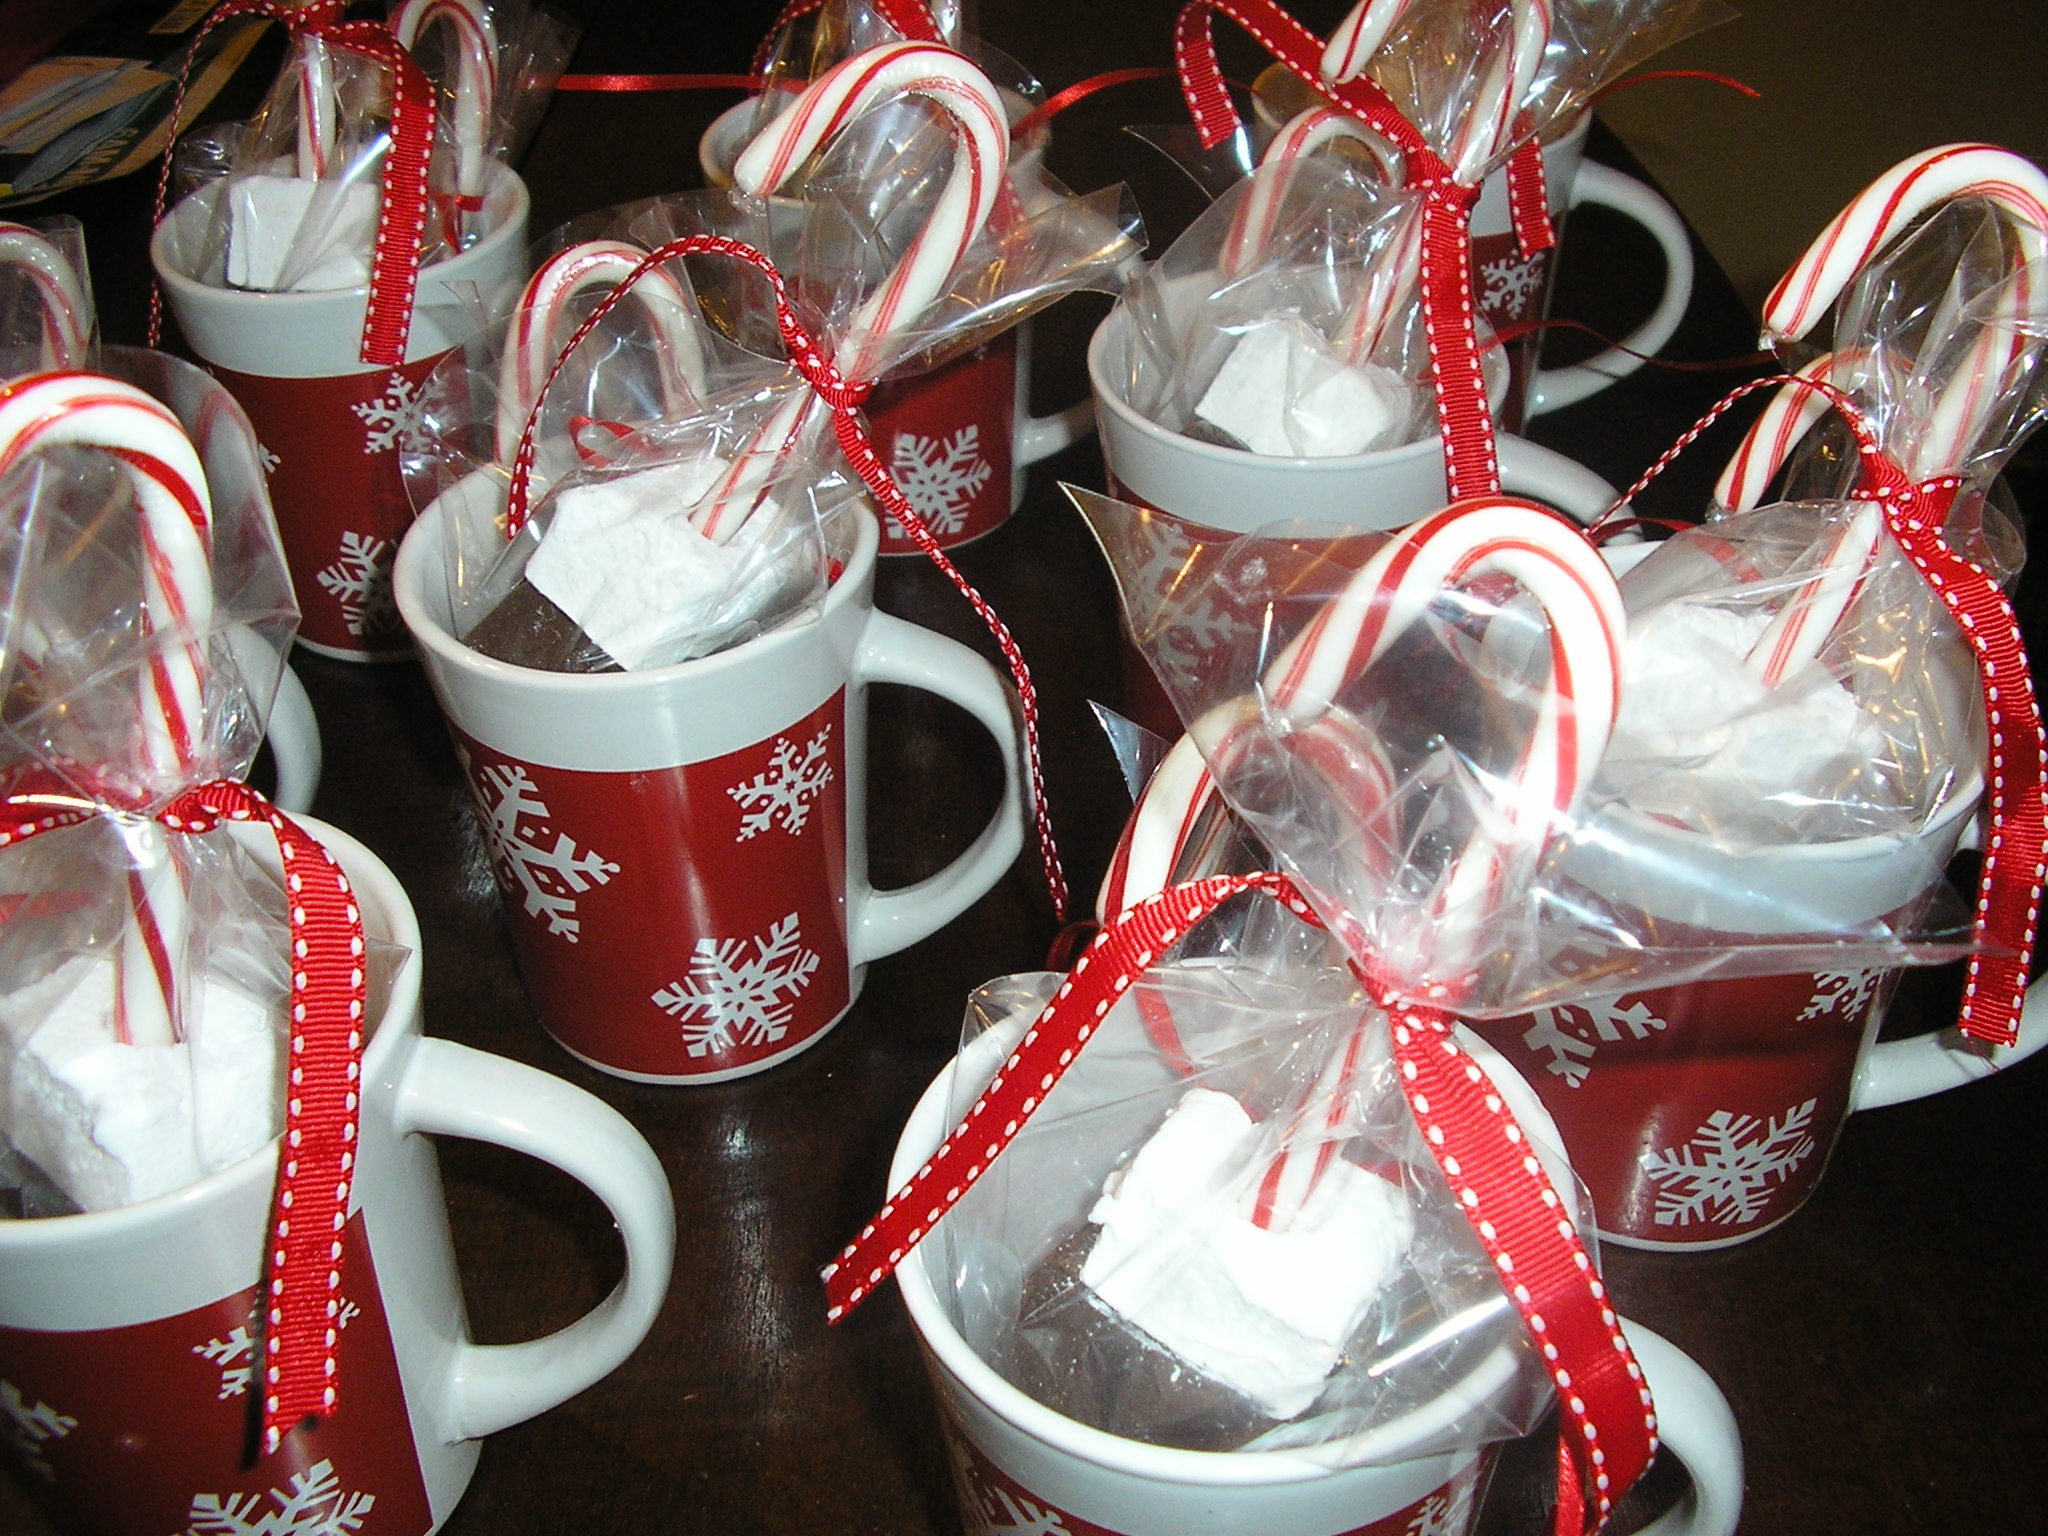 Christmas Chocolate Gift Ideas
 Last Minute Gifts From My Kitchen – Hot Chocolate Done Two